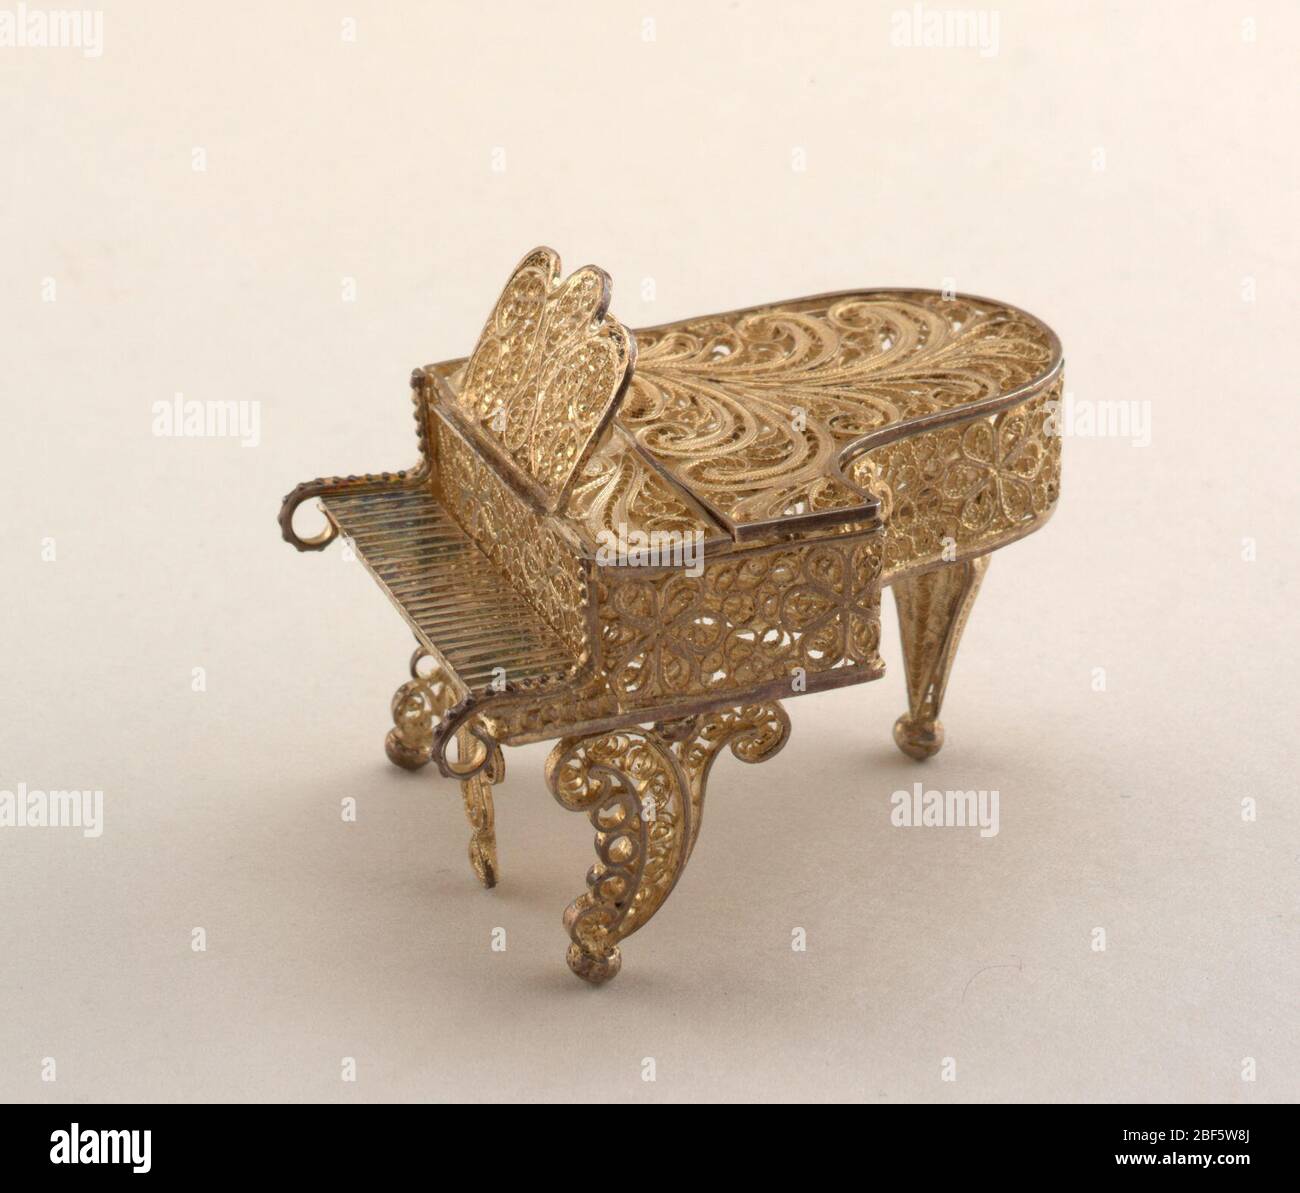 piano. Grand piano. Lid can be raised. Scrolled front legs, baluster rear leg. All-over decoration on case and rack of scrolled and rosetted filigree. Stock Photo